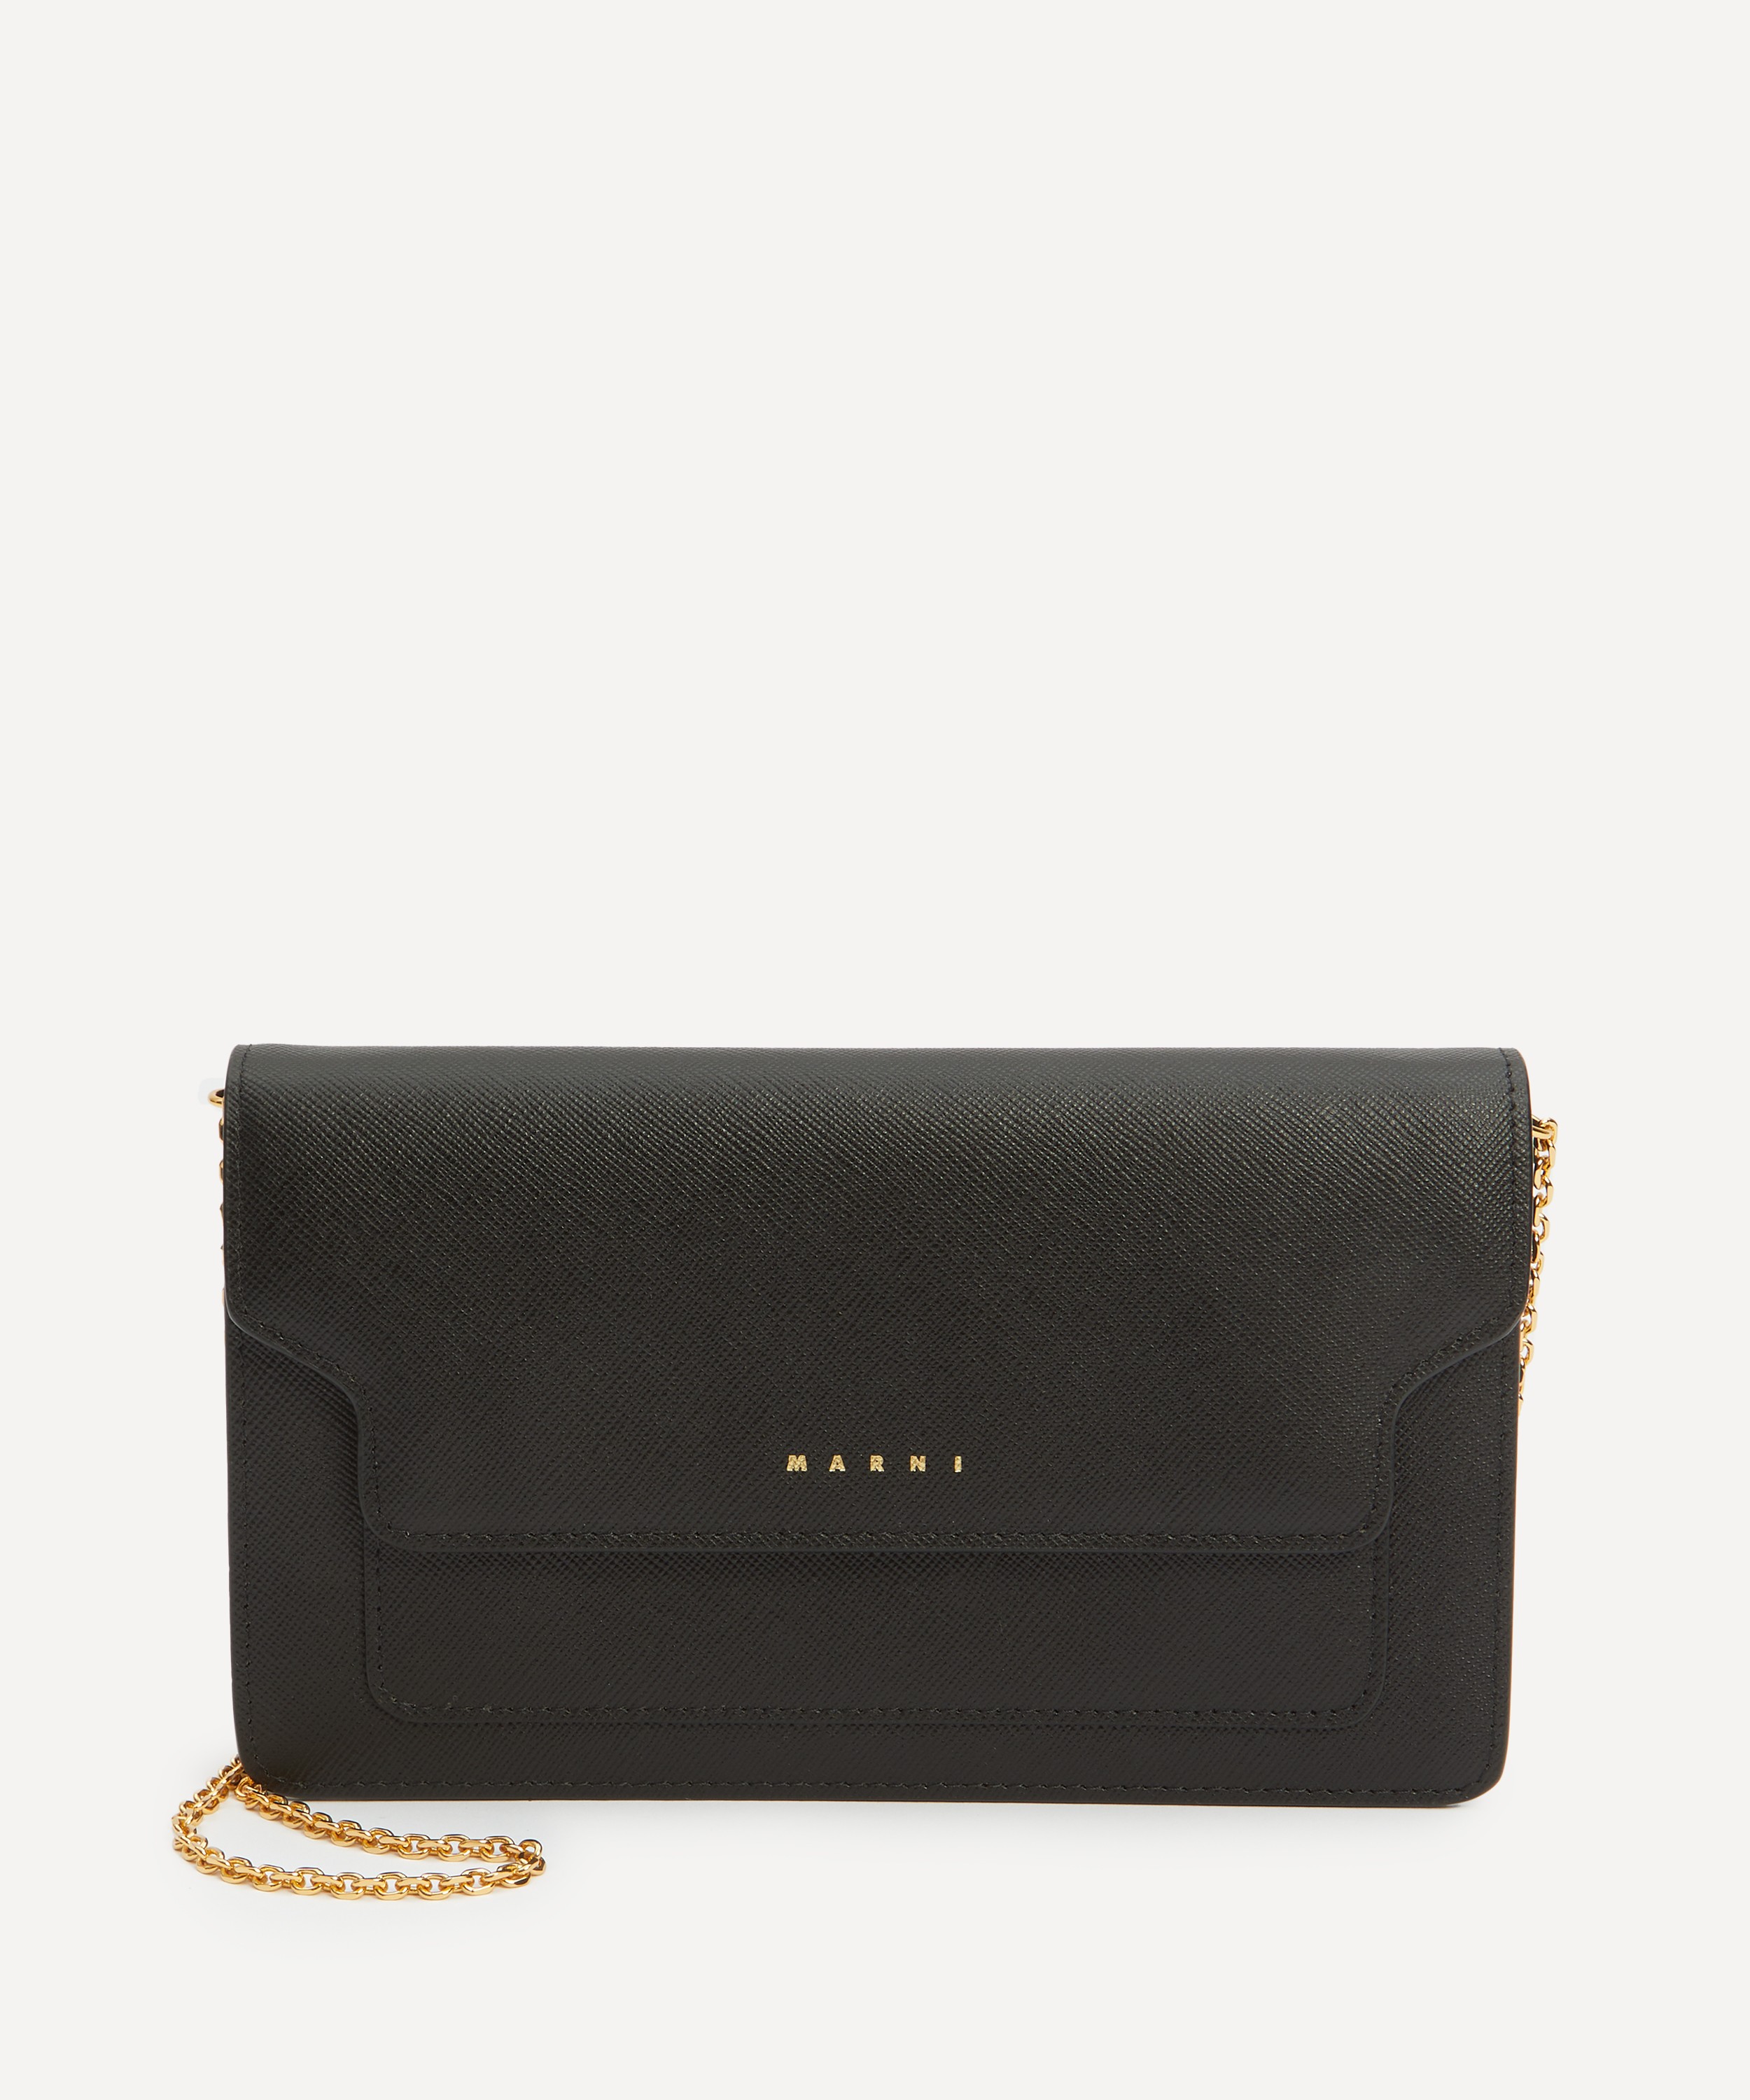 Marni - Long Black Leather Chain Wallet